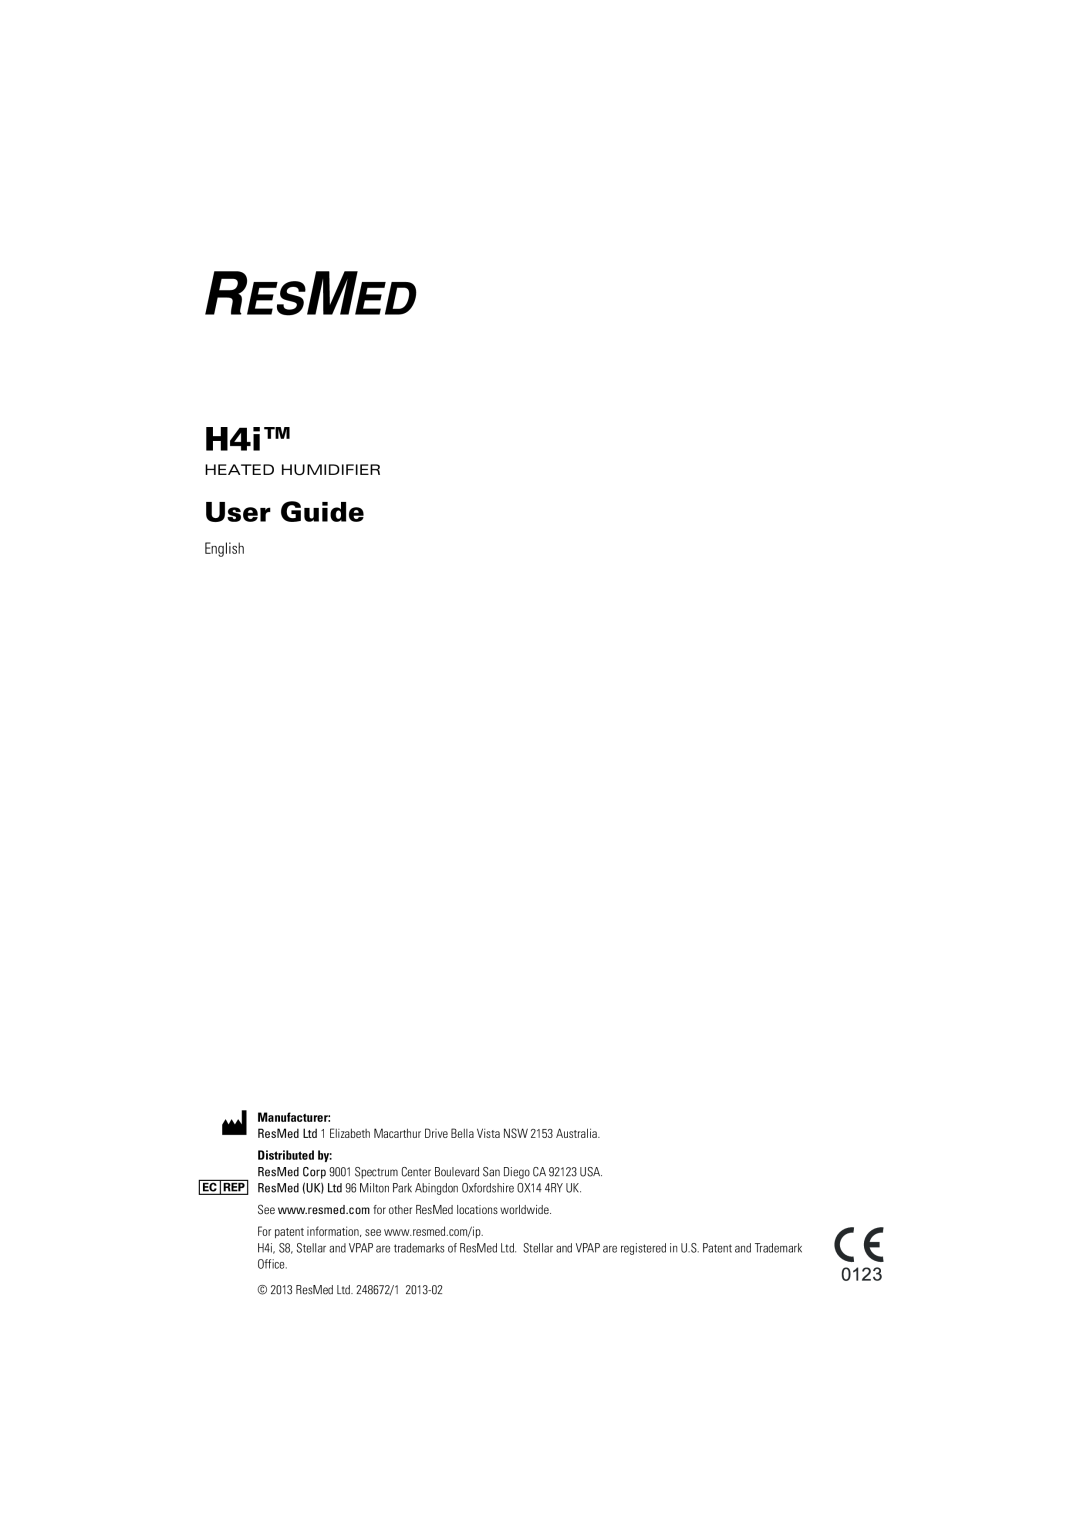 ResMed 1 h4i, 248672/1 manual User Guide, Heated Humidifier, English, Manufacturer, Distributed by 